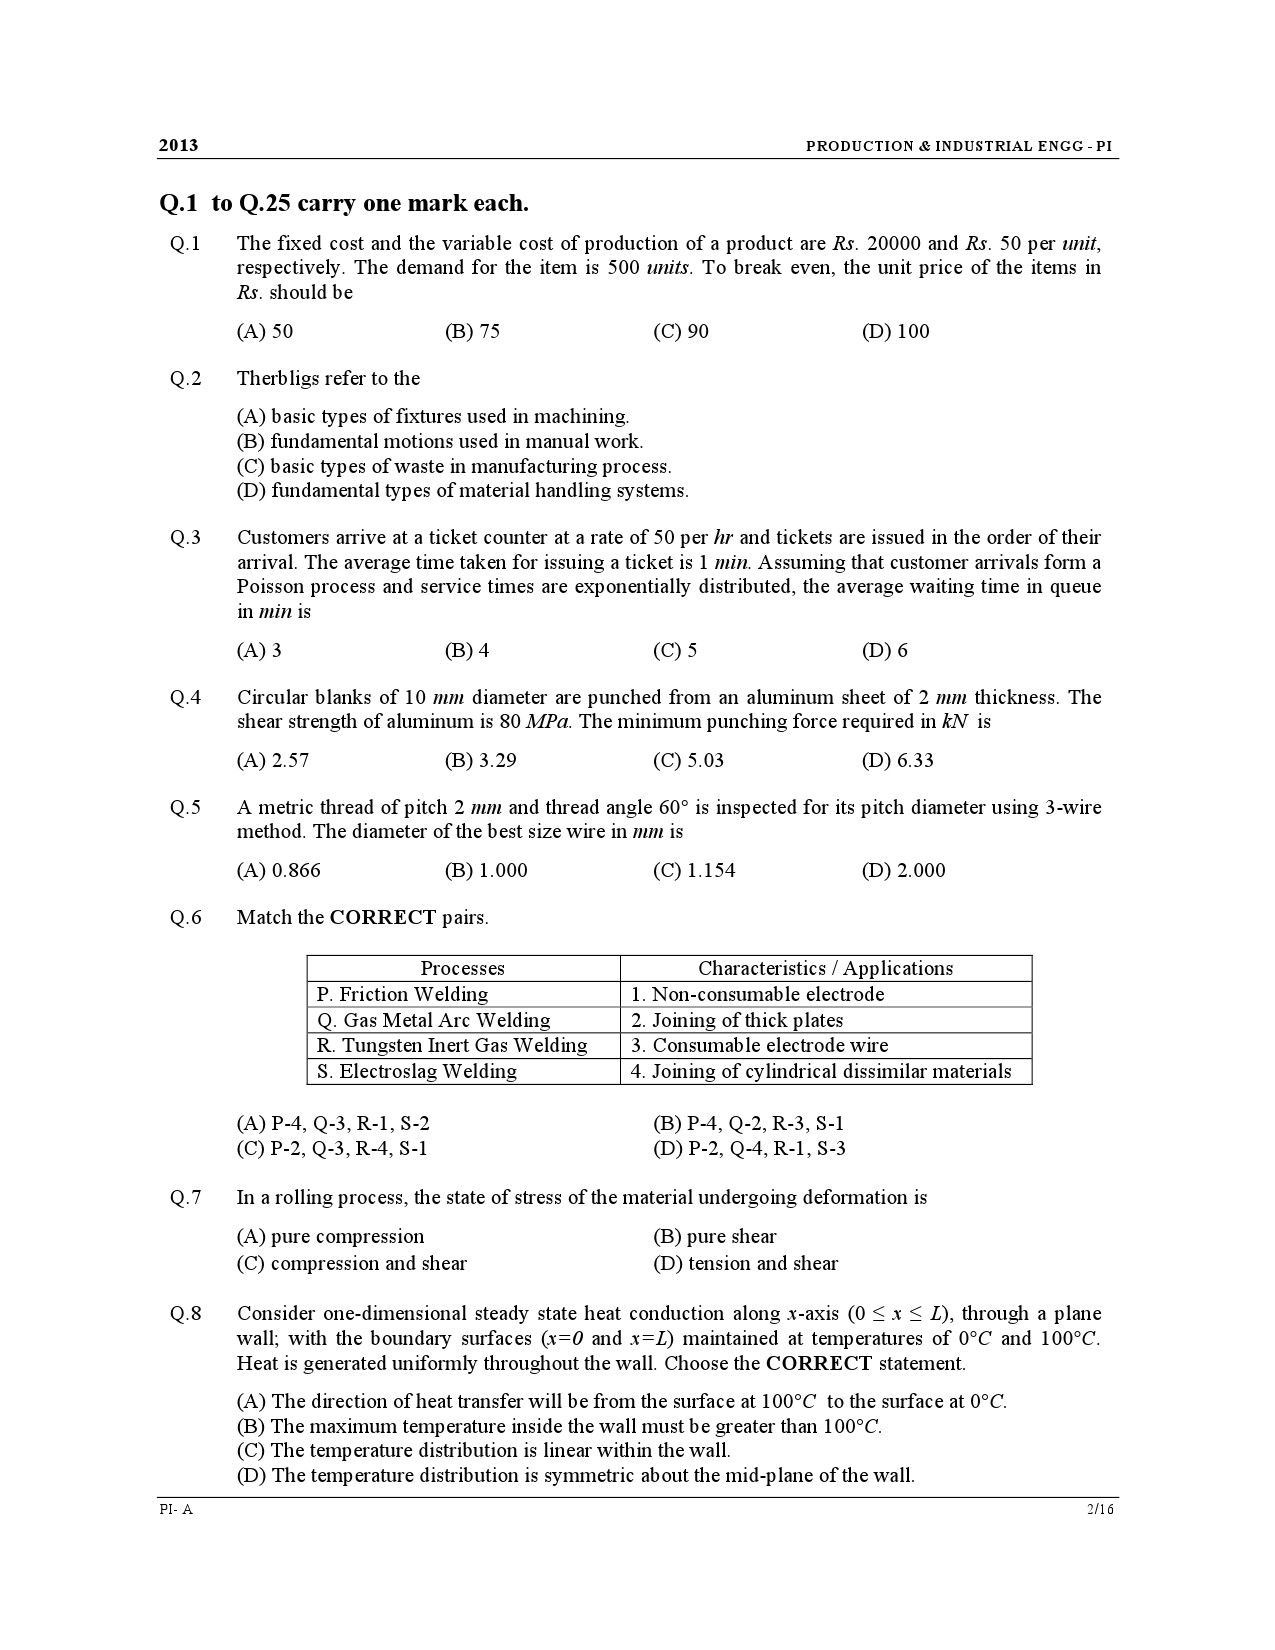 GATE Exam Question Paper 2013 Production and Industrial Engineering 2